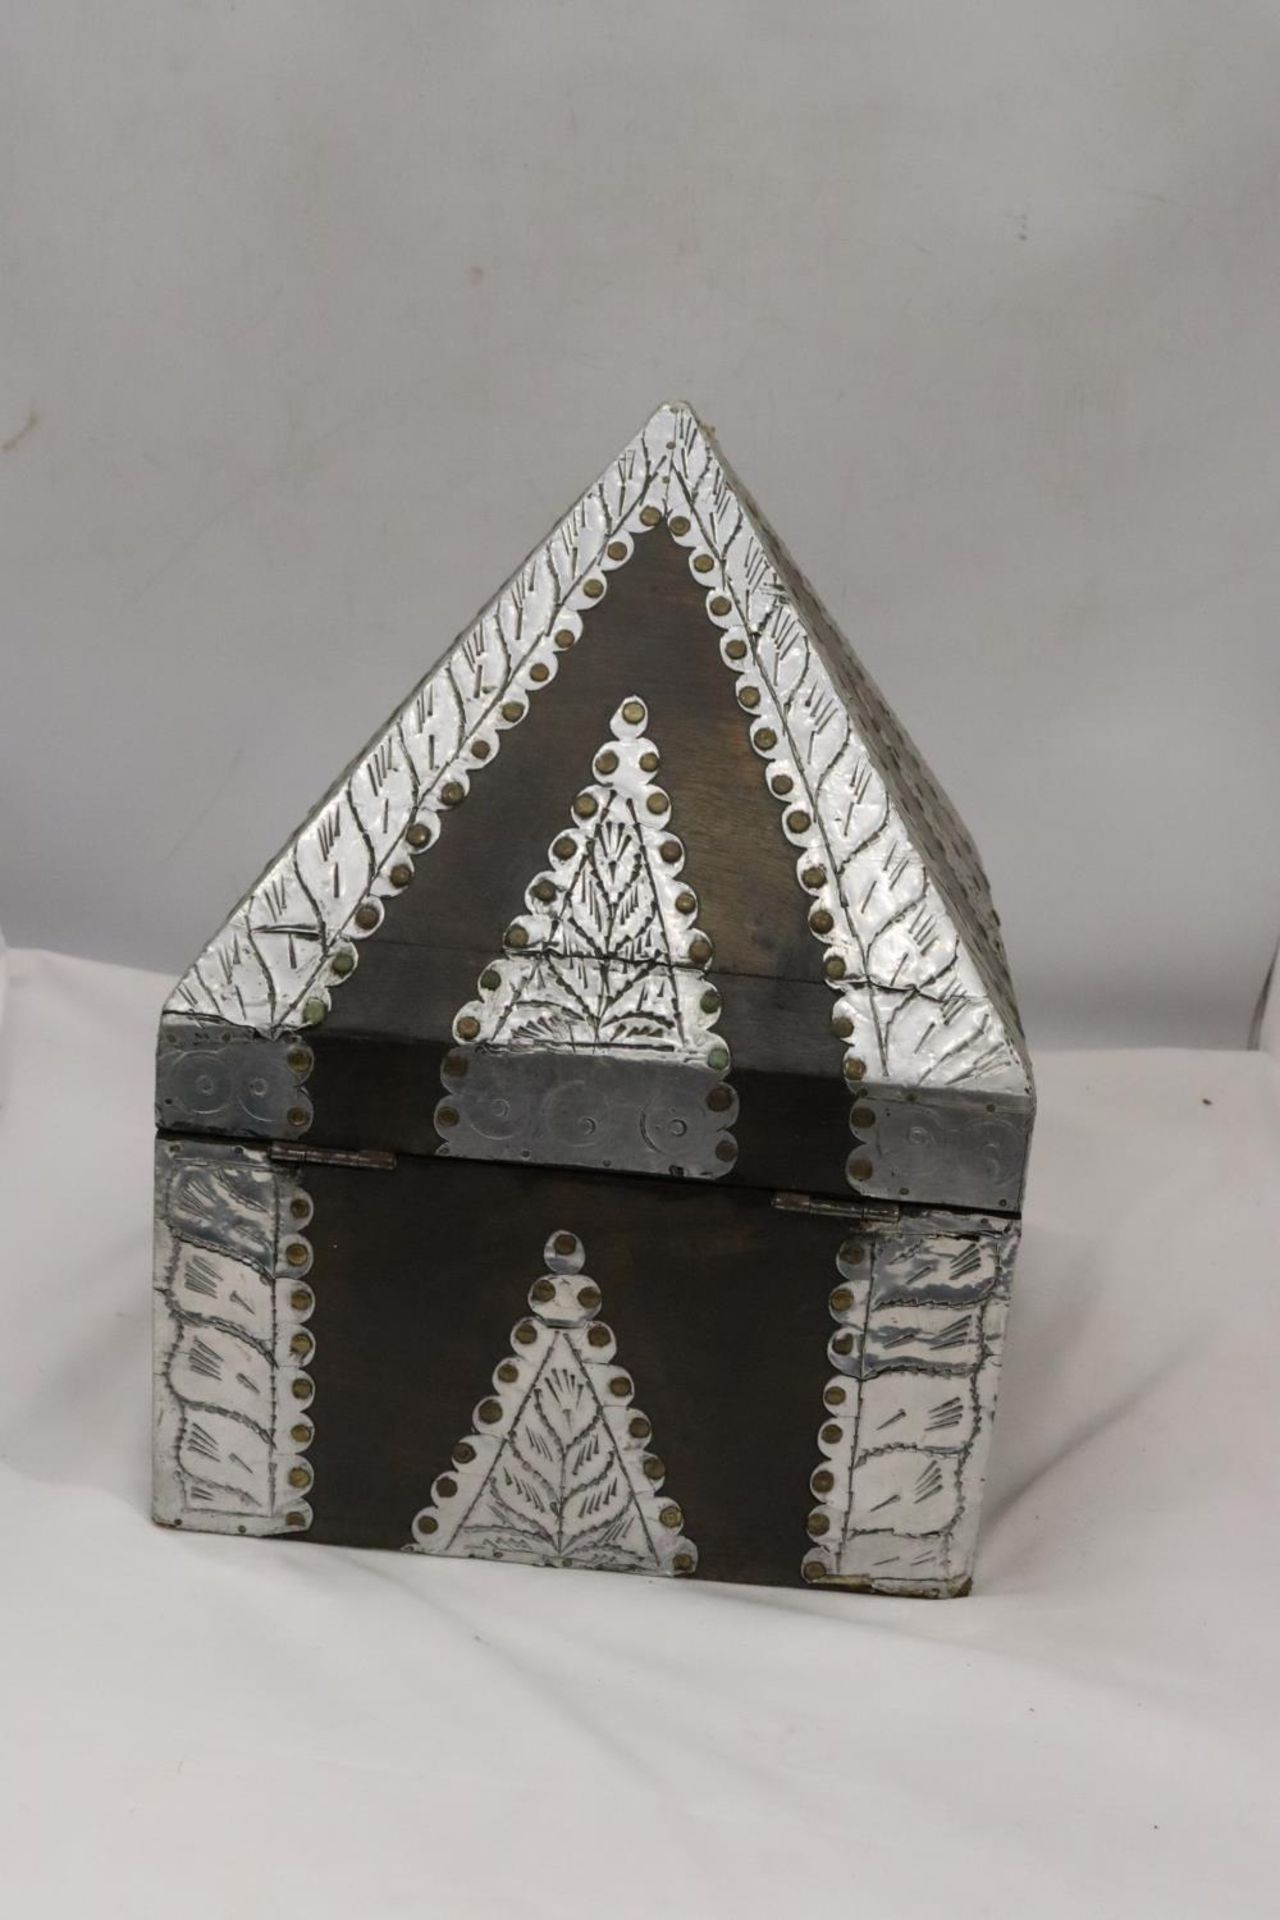 A VINTAGE WOOD AND METAL PYRAMID SHAPED BOX, HEIGHT 38CM - Image 4 of 5